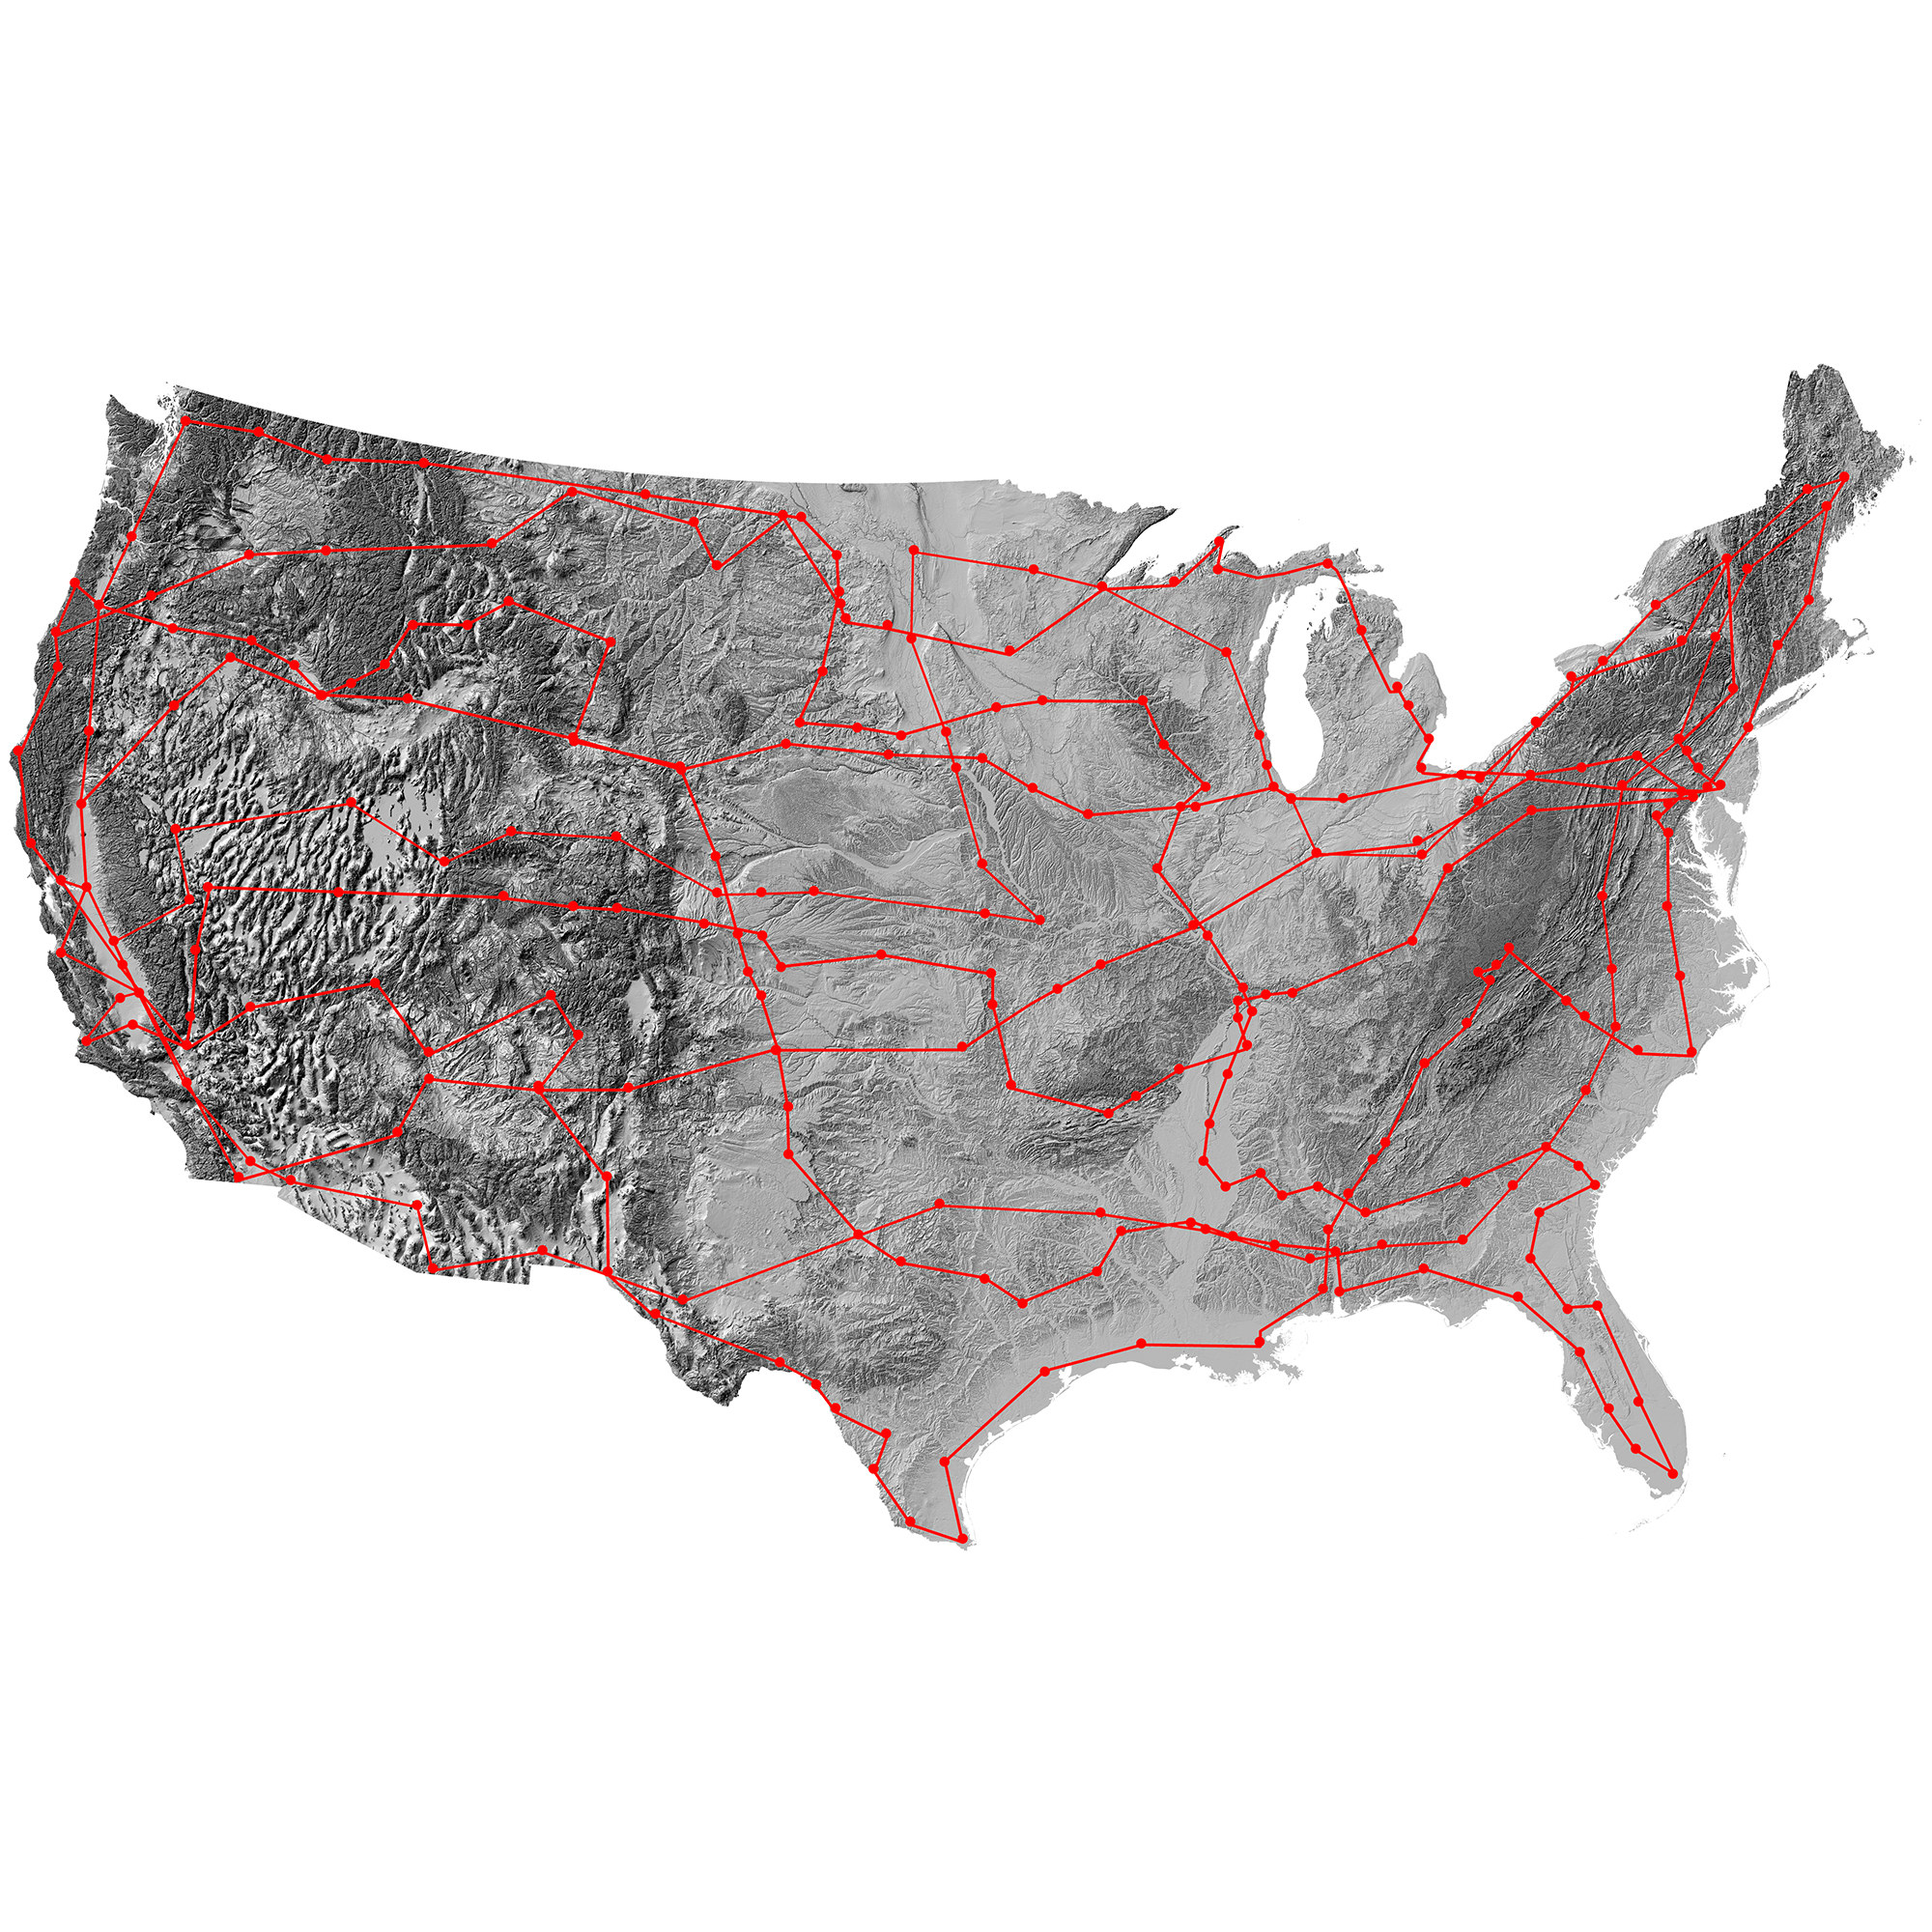 Criss-crossed lines are overlayed over a map of the US